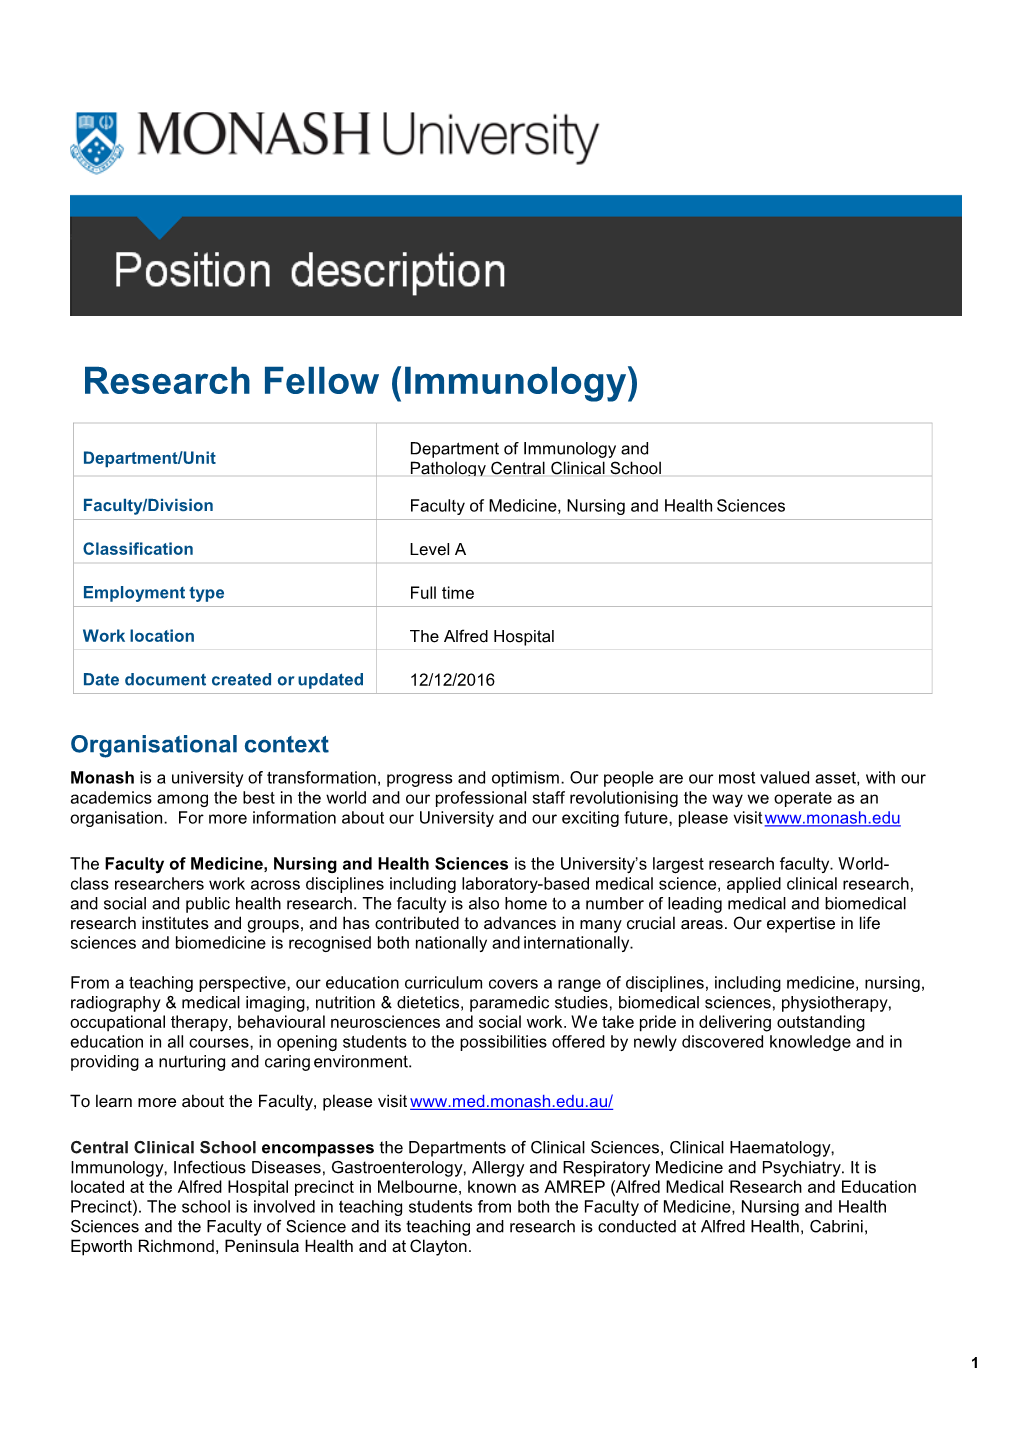 Research Fellow (Immunology)